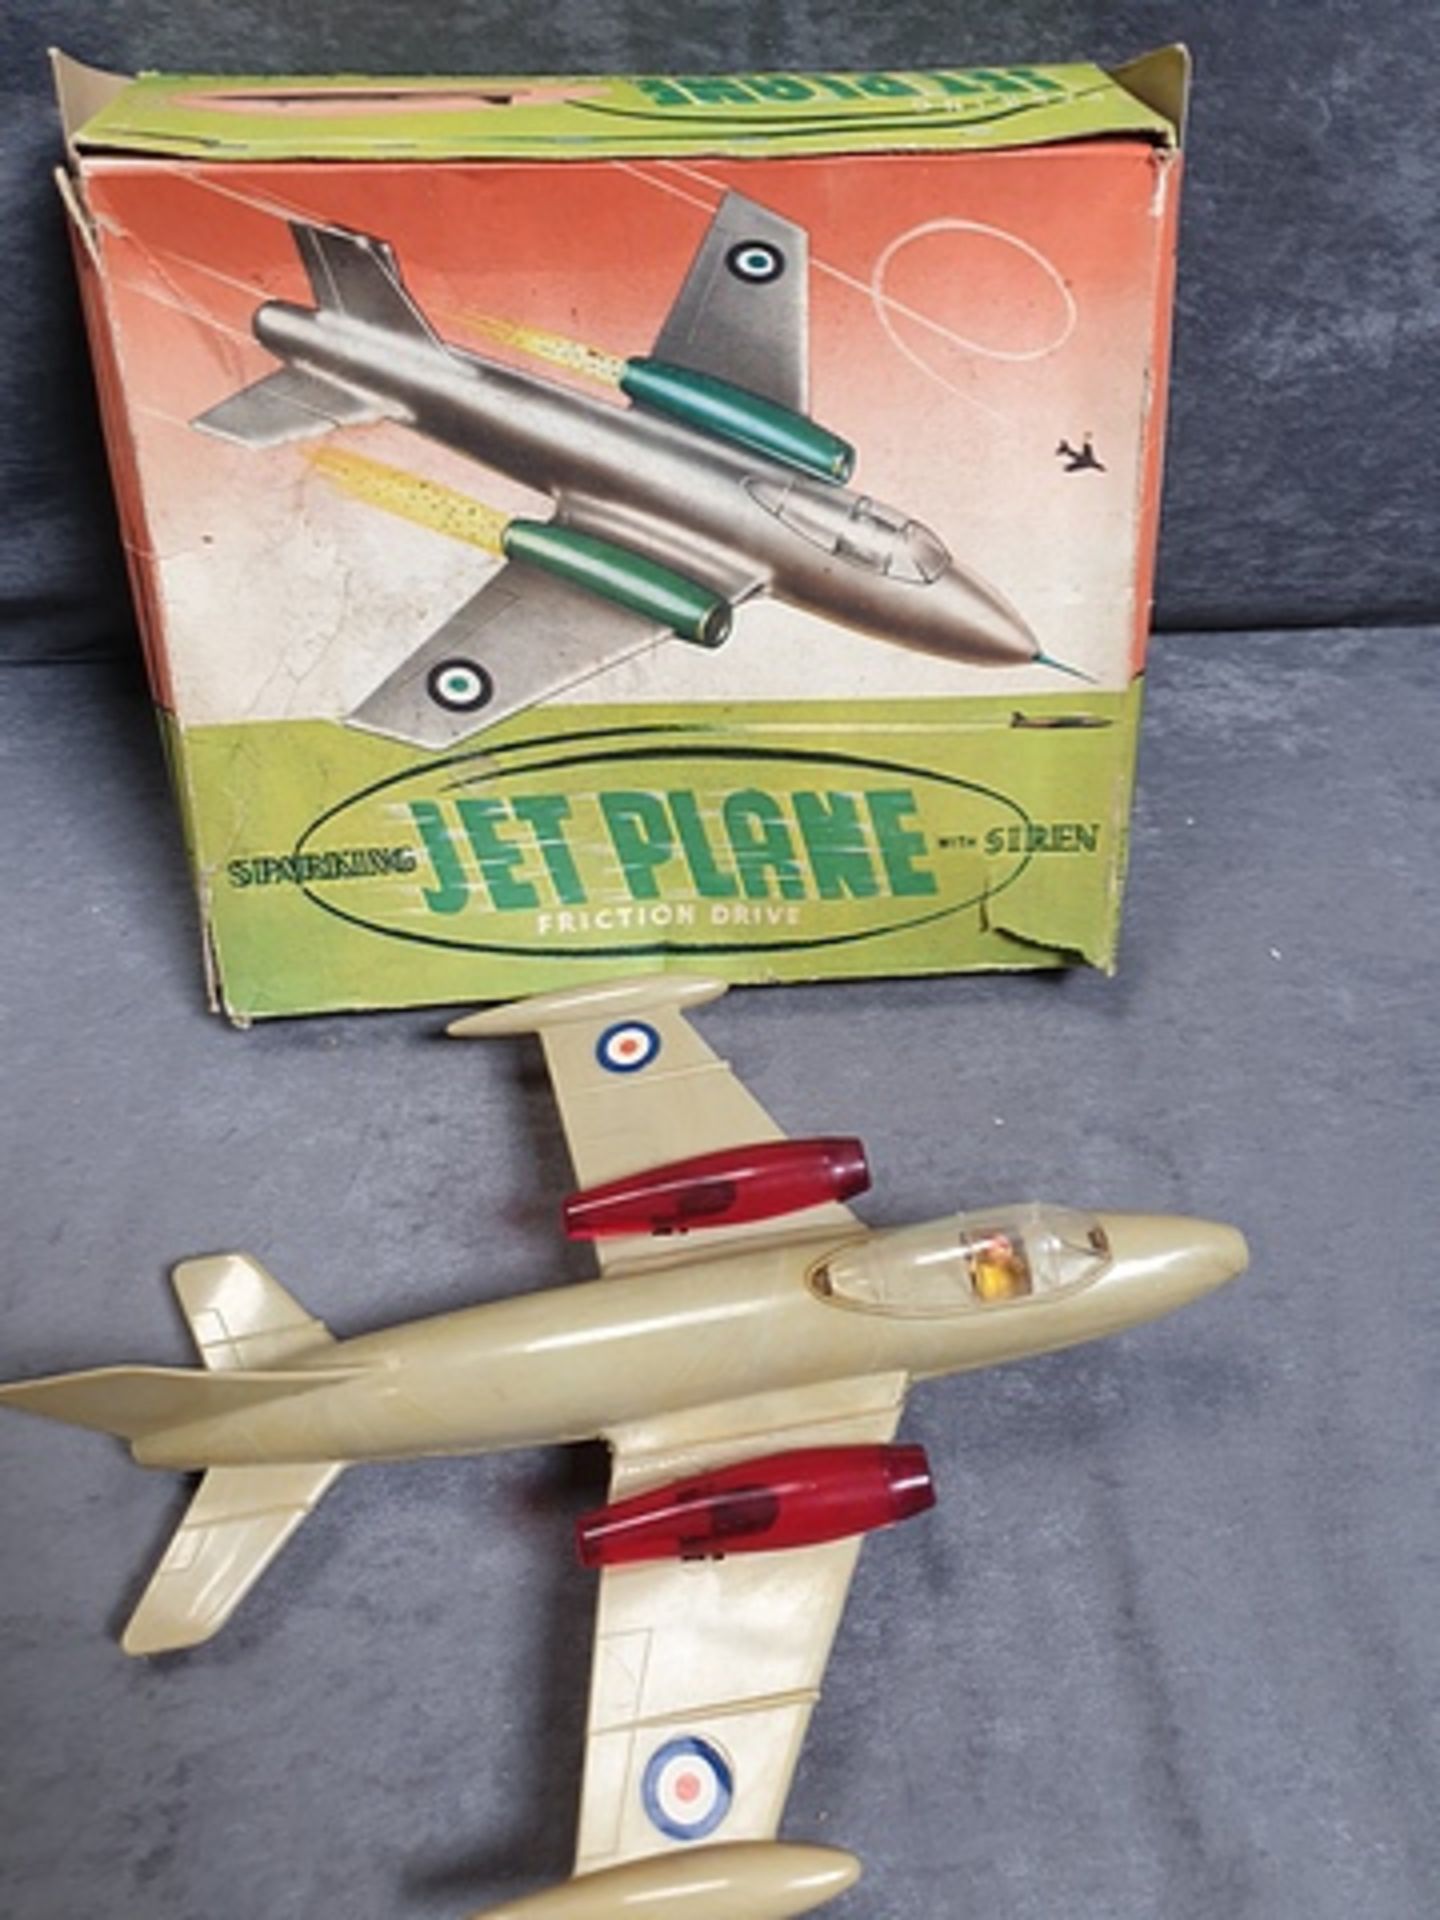 Vintage Friction Drive Sparking Jet Plane With Siren Article No 2020 Made In Great Britain